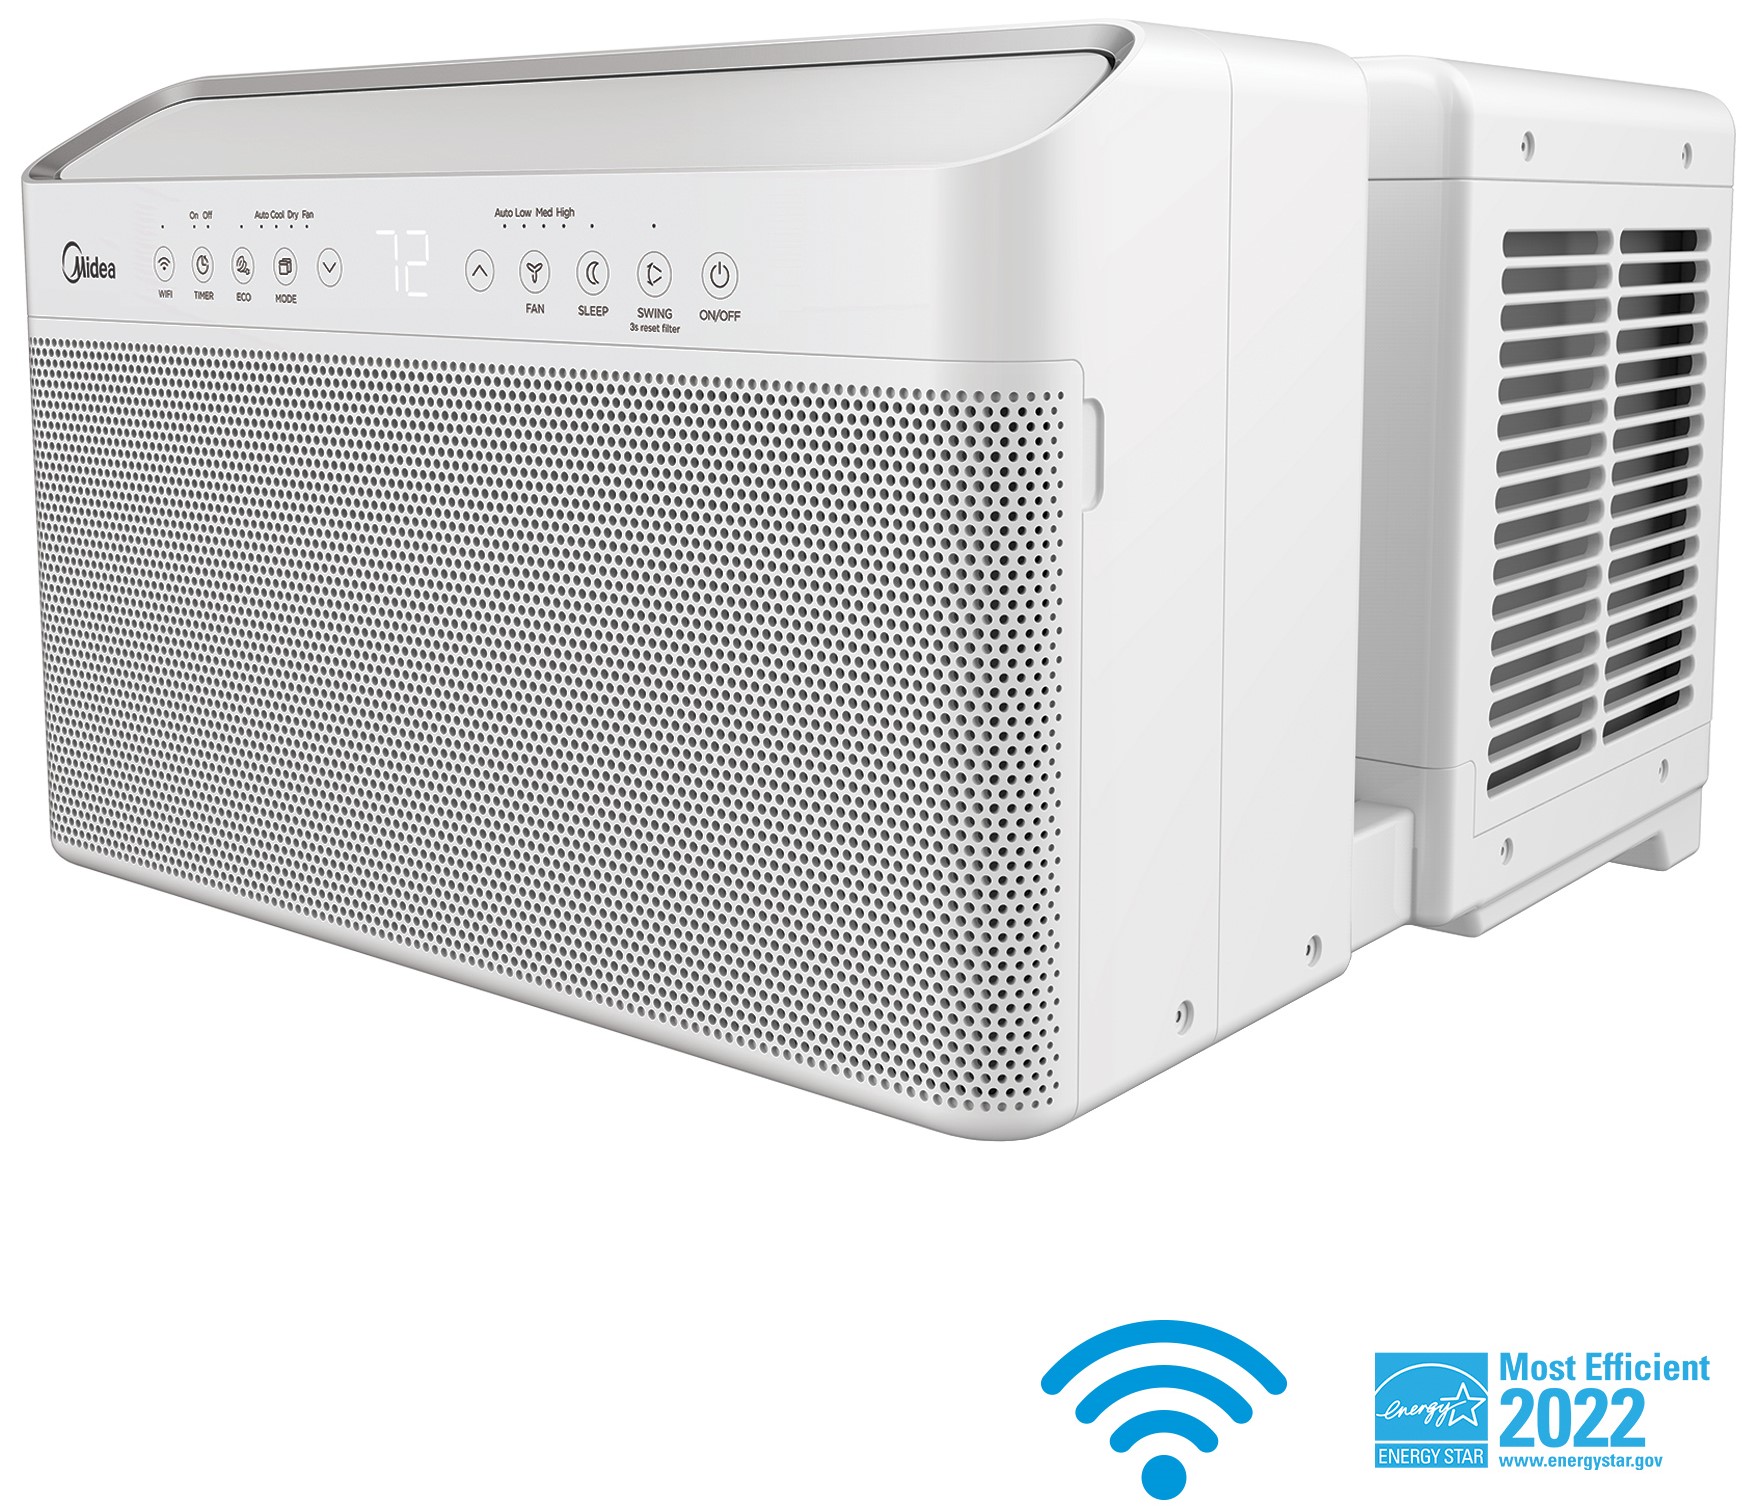 Midea 12,000 BTU Smart Inverter U-Shaped Window Air Conditioner, 35% Energy Savings, Extreme Quiet, Covers up to 550 Sq. ft., MAW12V1QWT - image 17 of 18